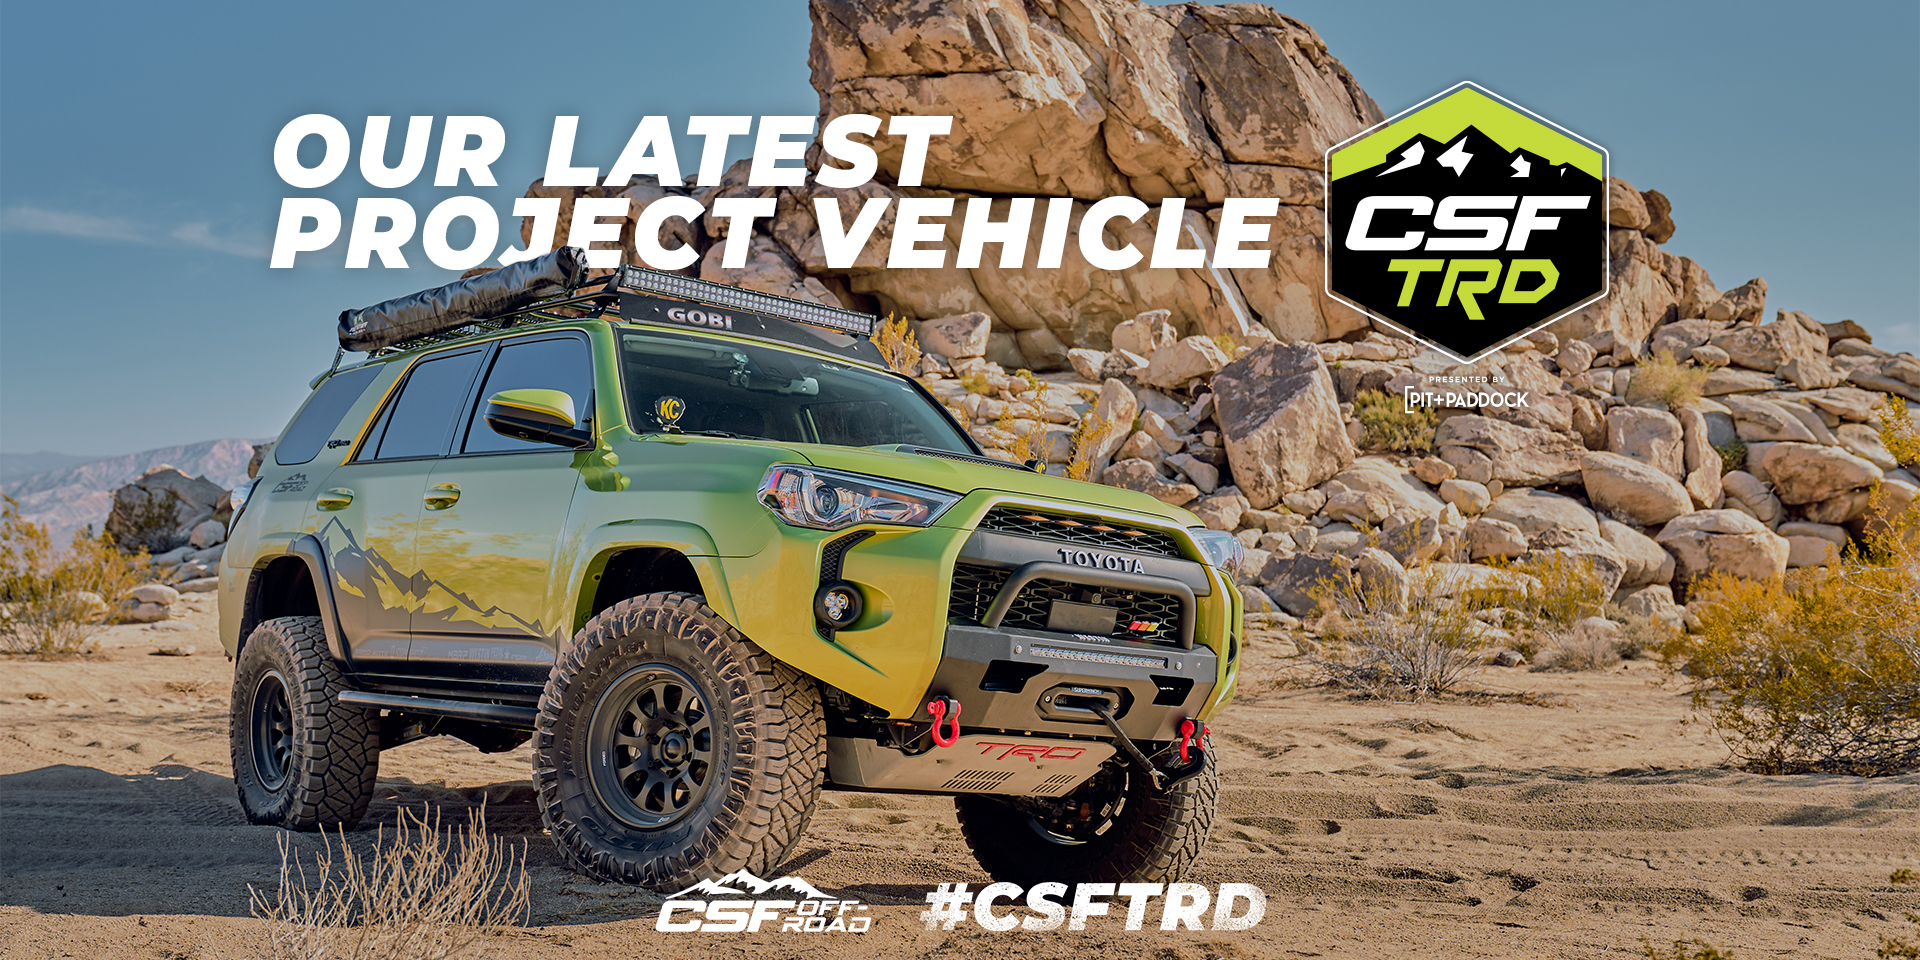 CSF TRD 4Runner Project with Pit+Paddock